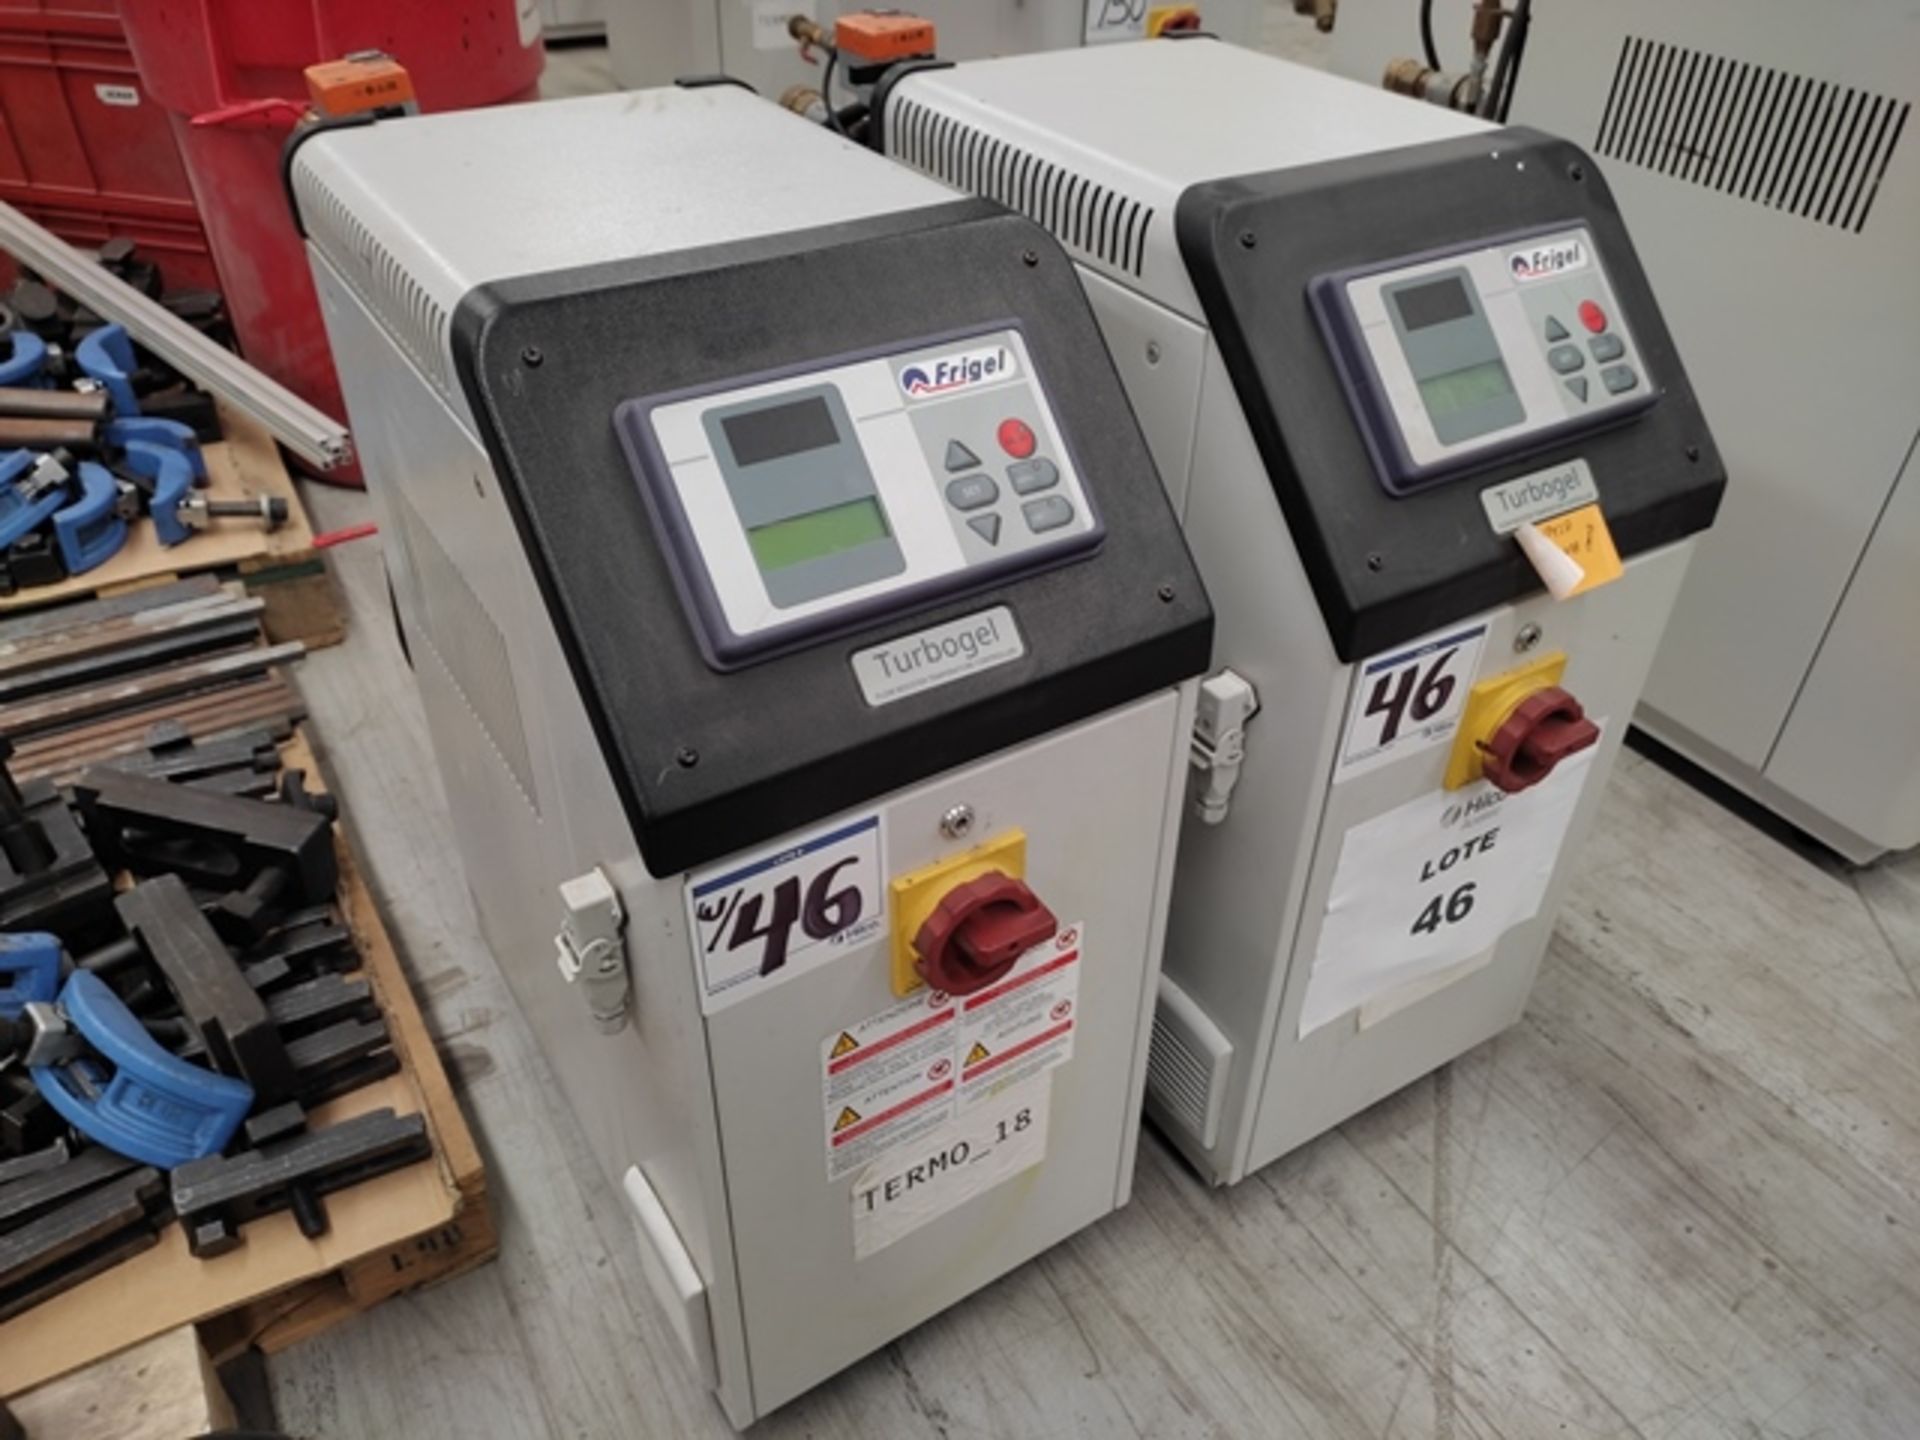 Lot of: (2) Frigel RBM130/24 SP 24 KW Flow Booster Temperature Controllers, Mfg. Year: 2017 - Image 3 of 9